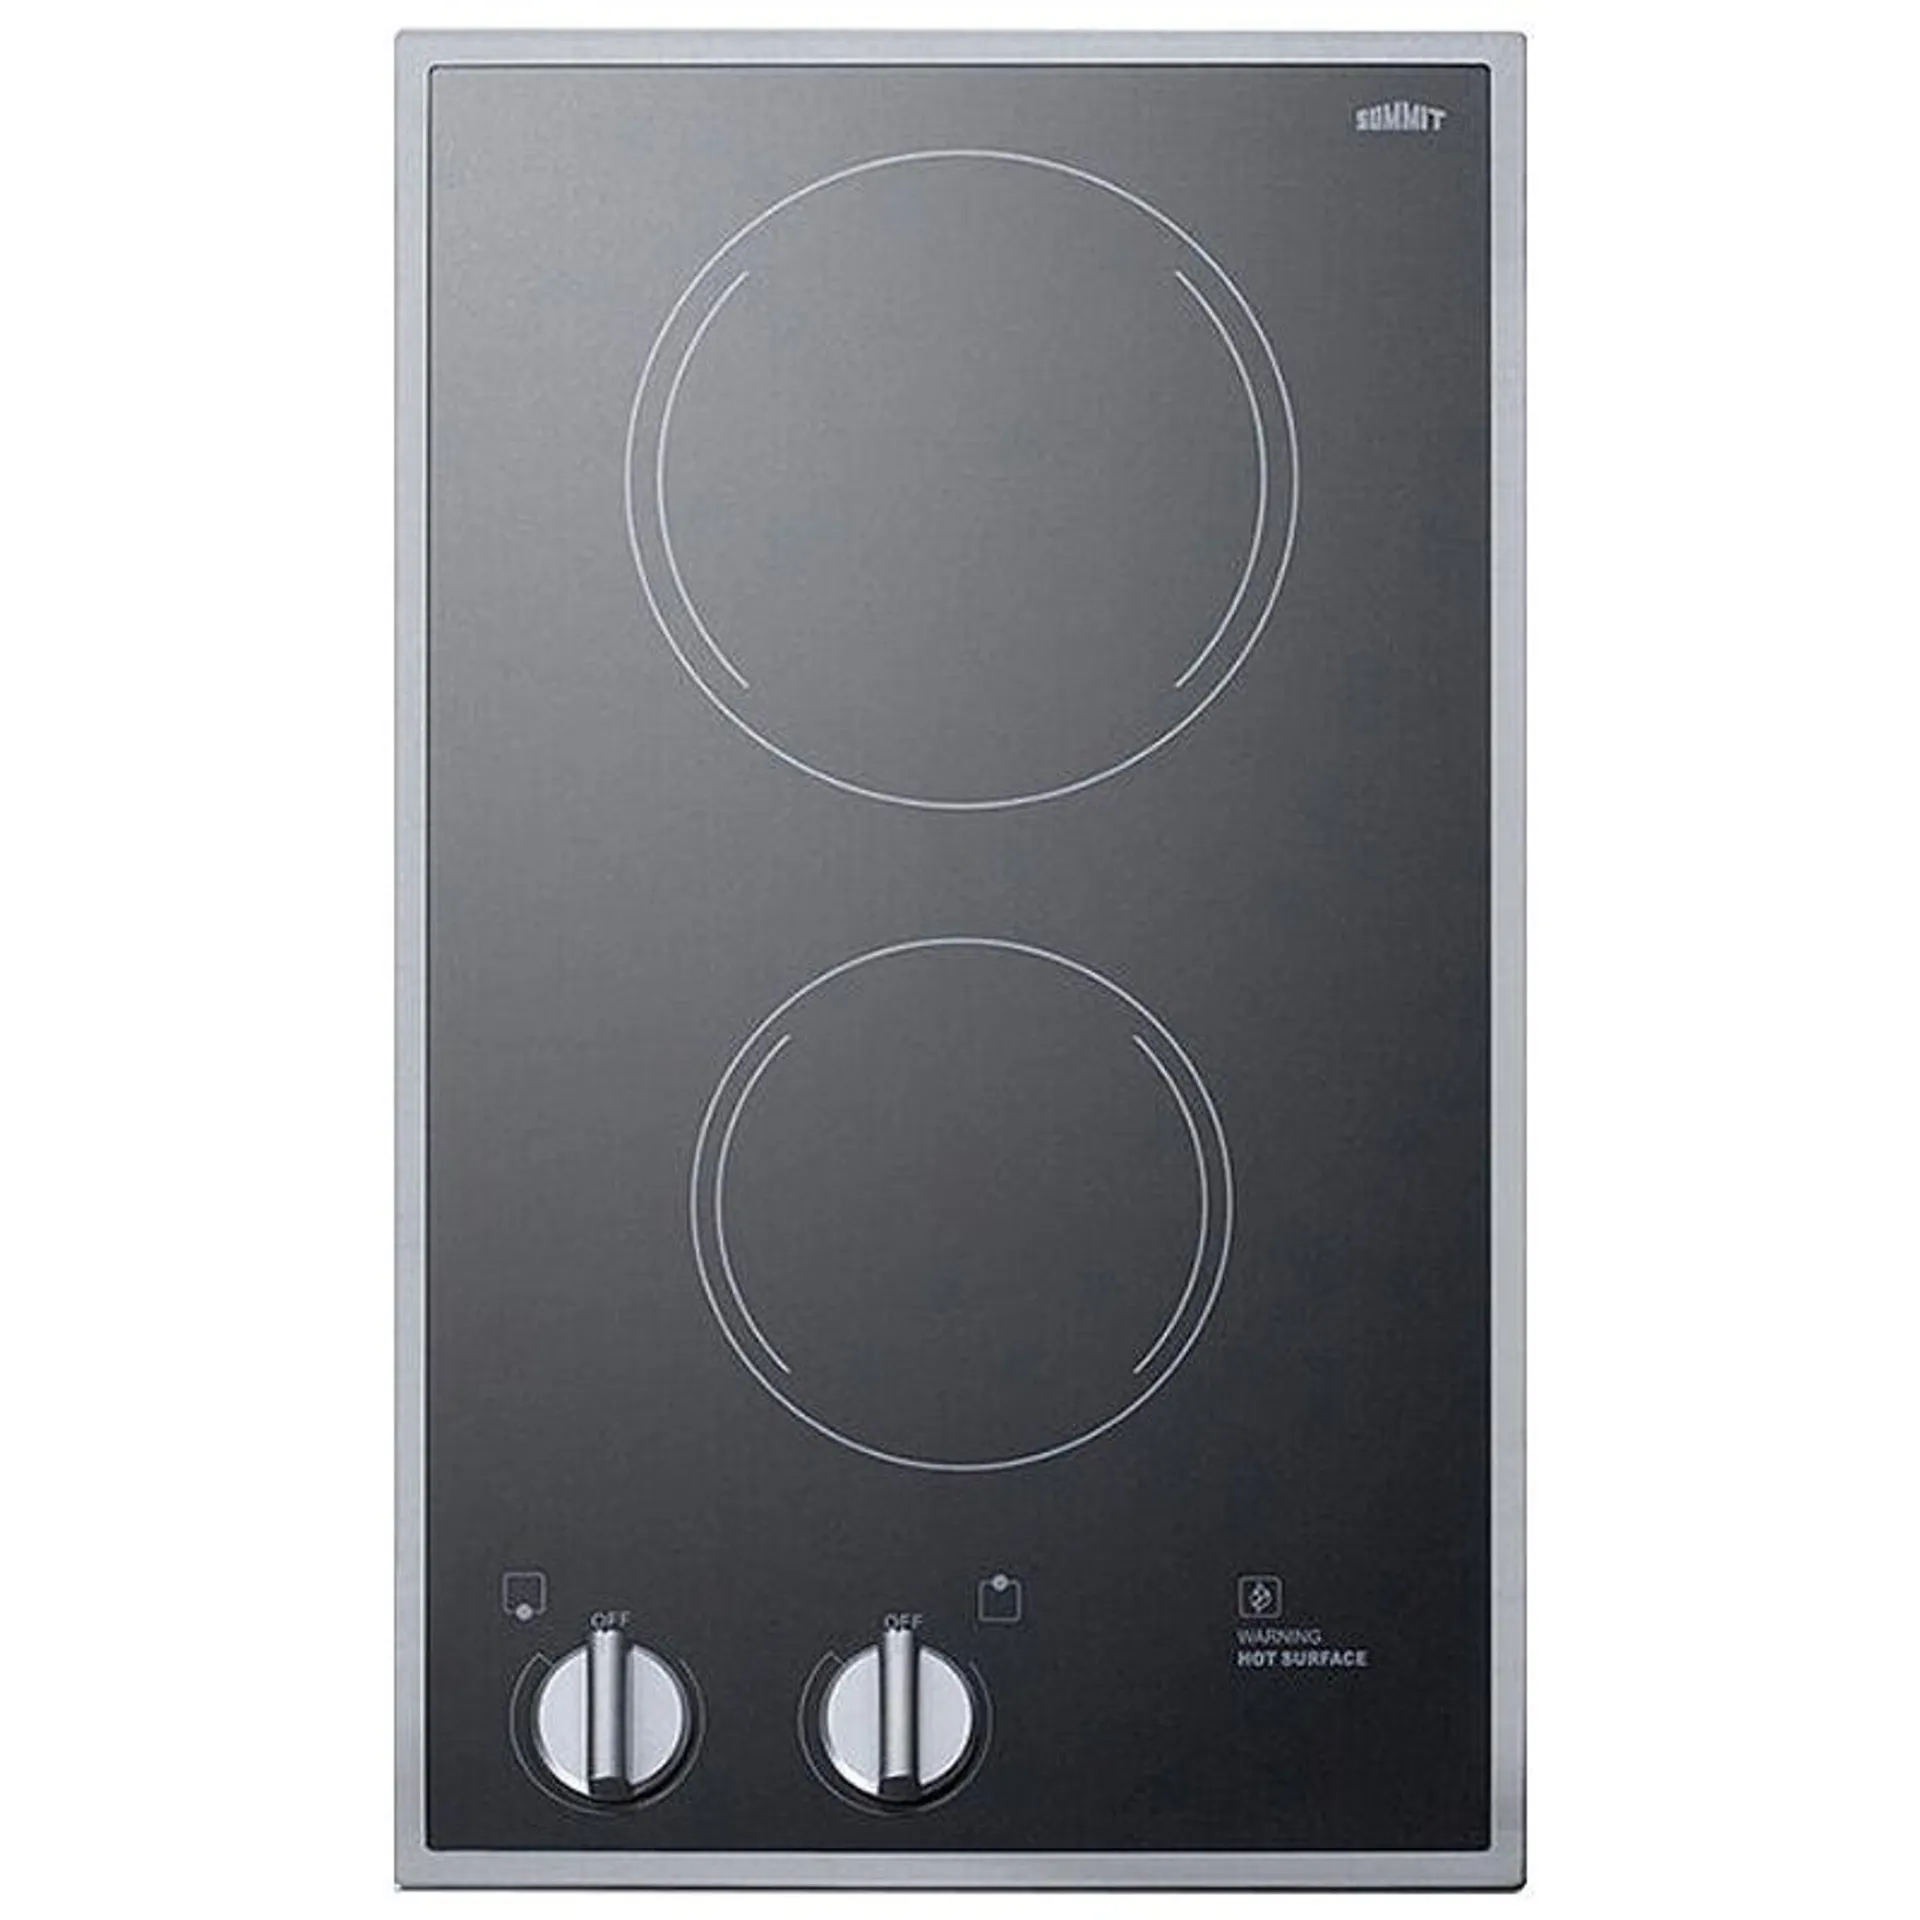 Summit 12 in. Electric Cooktop with 2 Smoothtop Burners - Black Glass